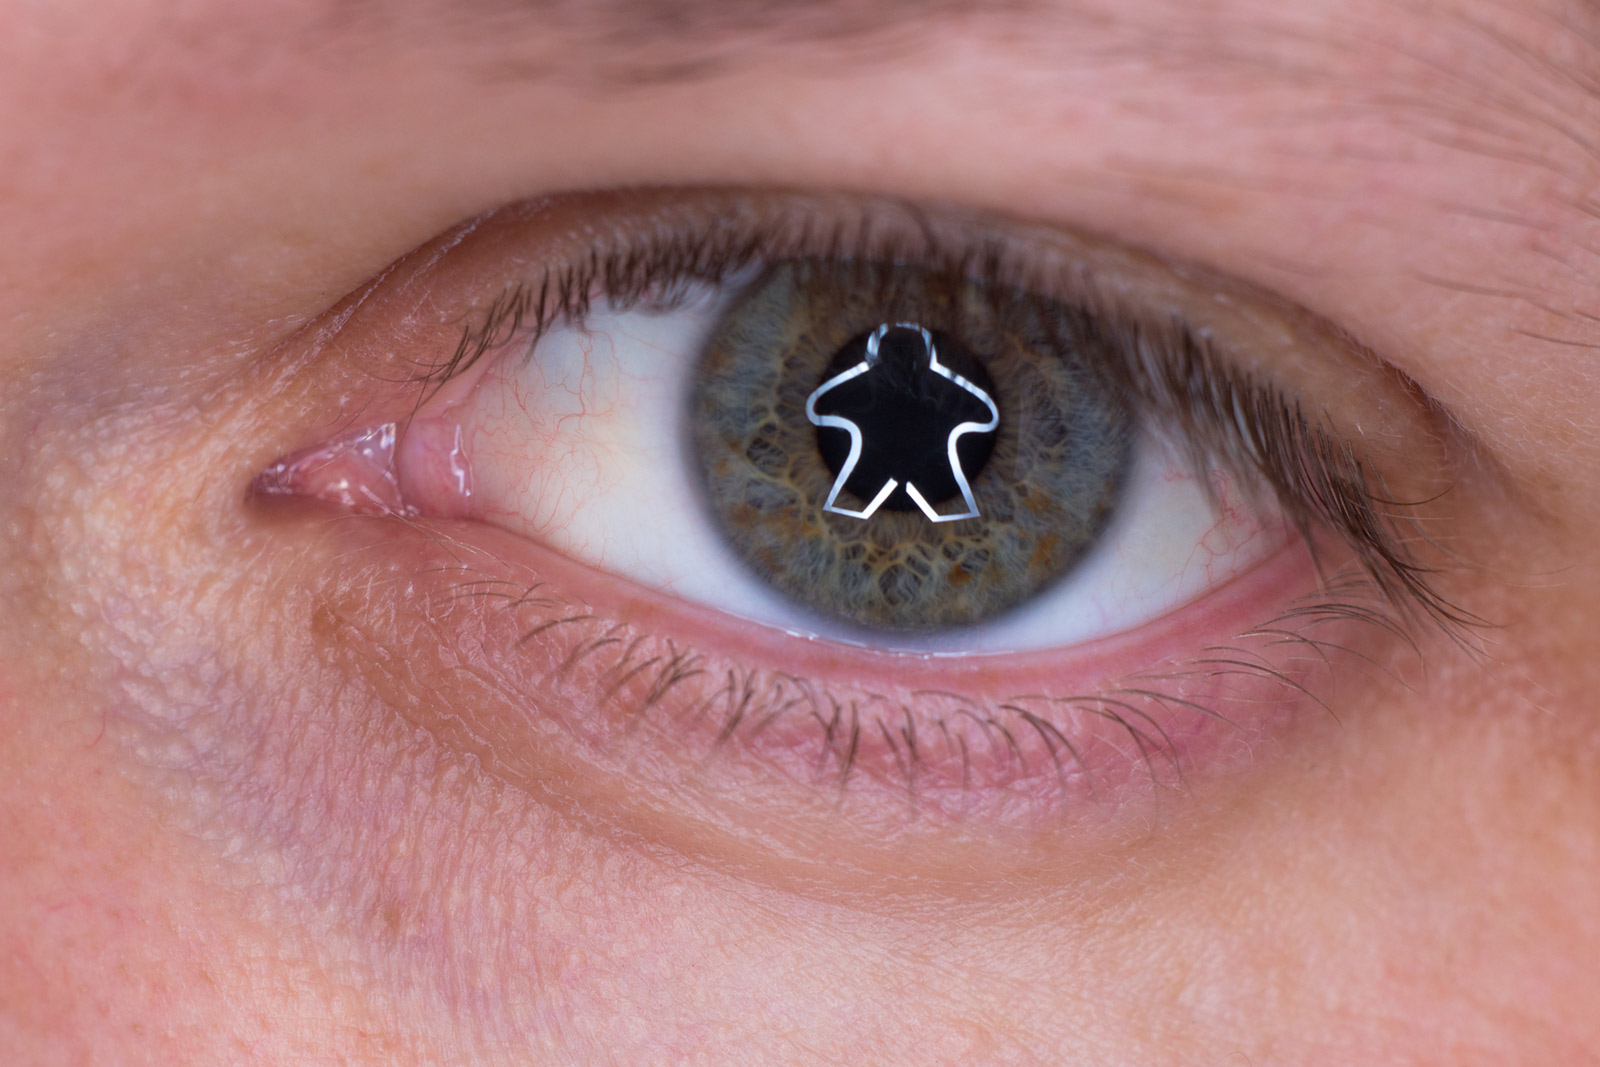 Custom meeple shaped catchlight creates the iconic board game pawn shape in the reflection of an eye.